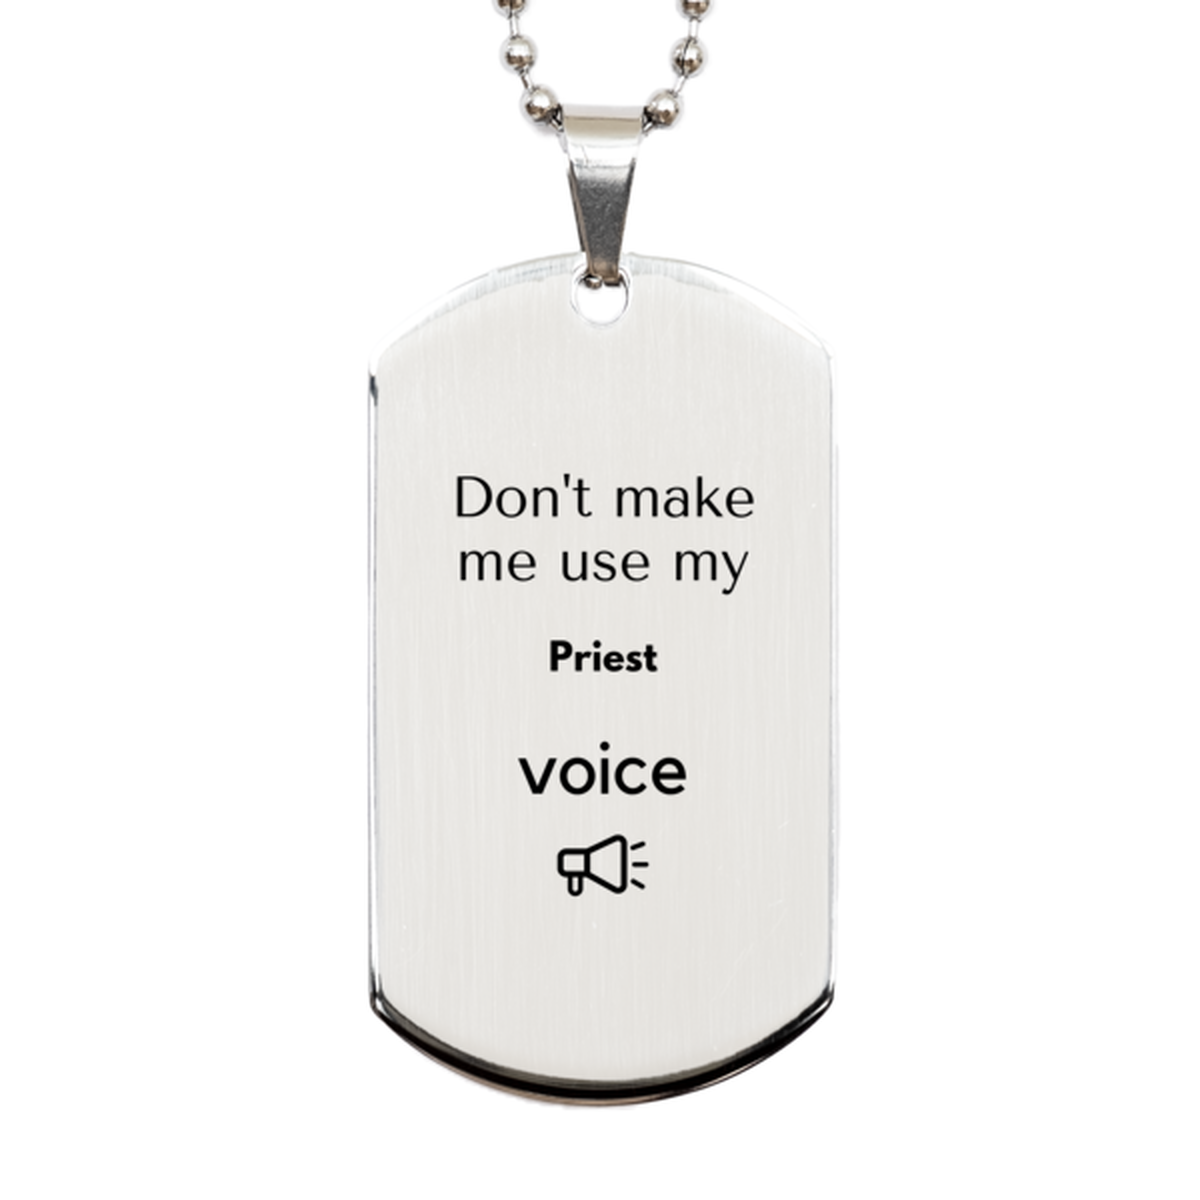 Don't make me use my Priest voice, Sarcasm Priest Gifts, Christmas Priest Silver Dog Tag Birthday Unique Gifts For Priest Coworkers, Men, Women, Colleague, Friends